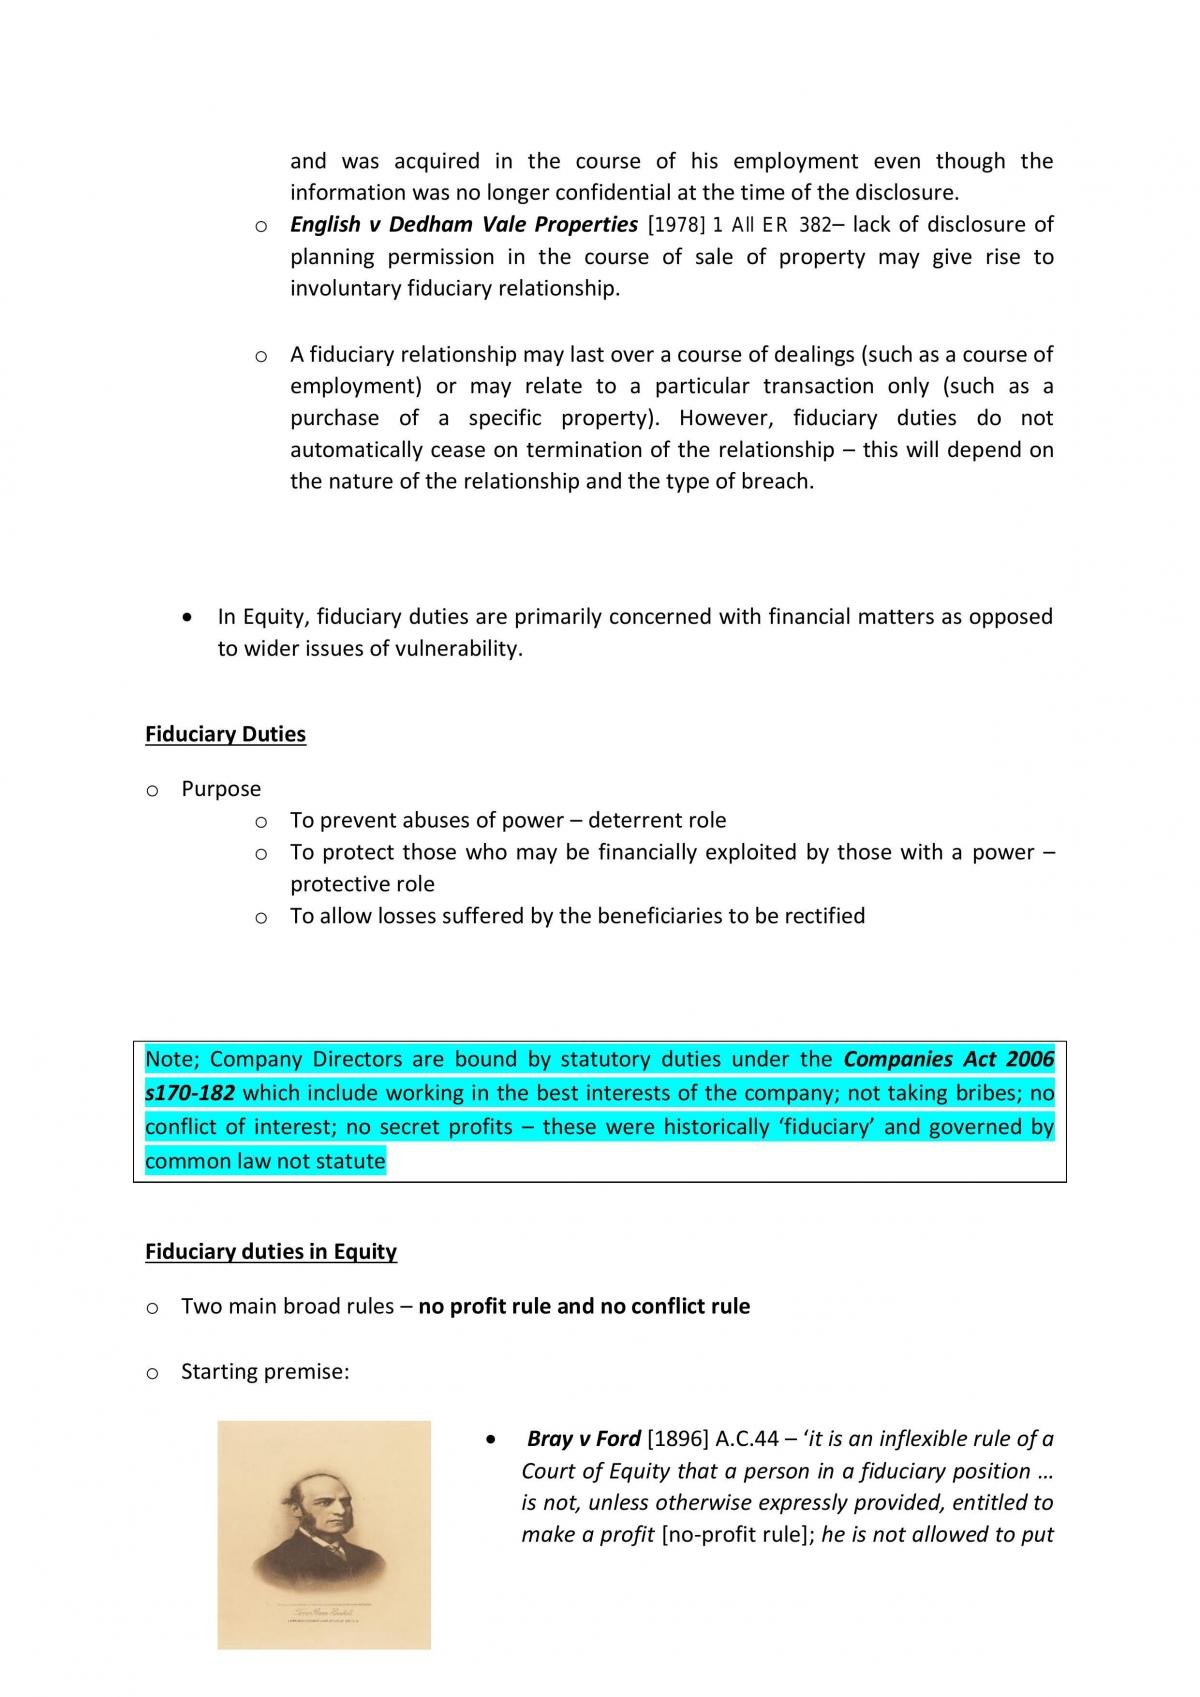 Equity & Trusts notes - Page 41